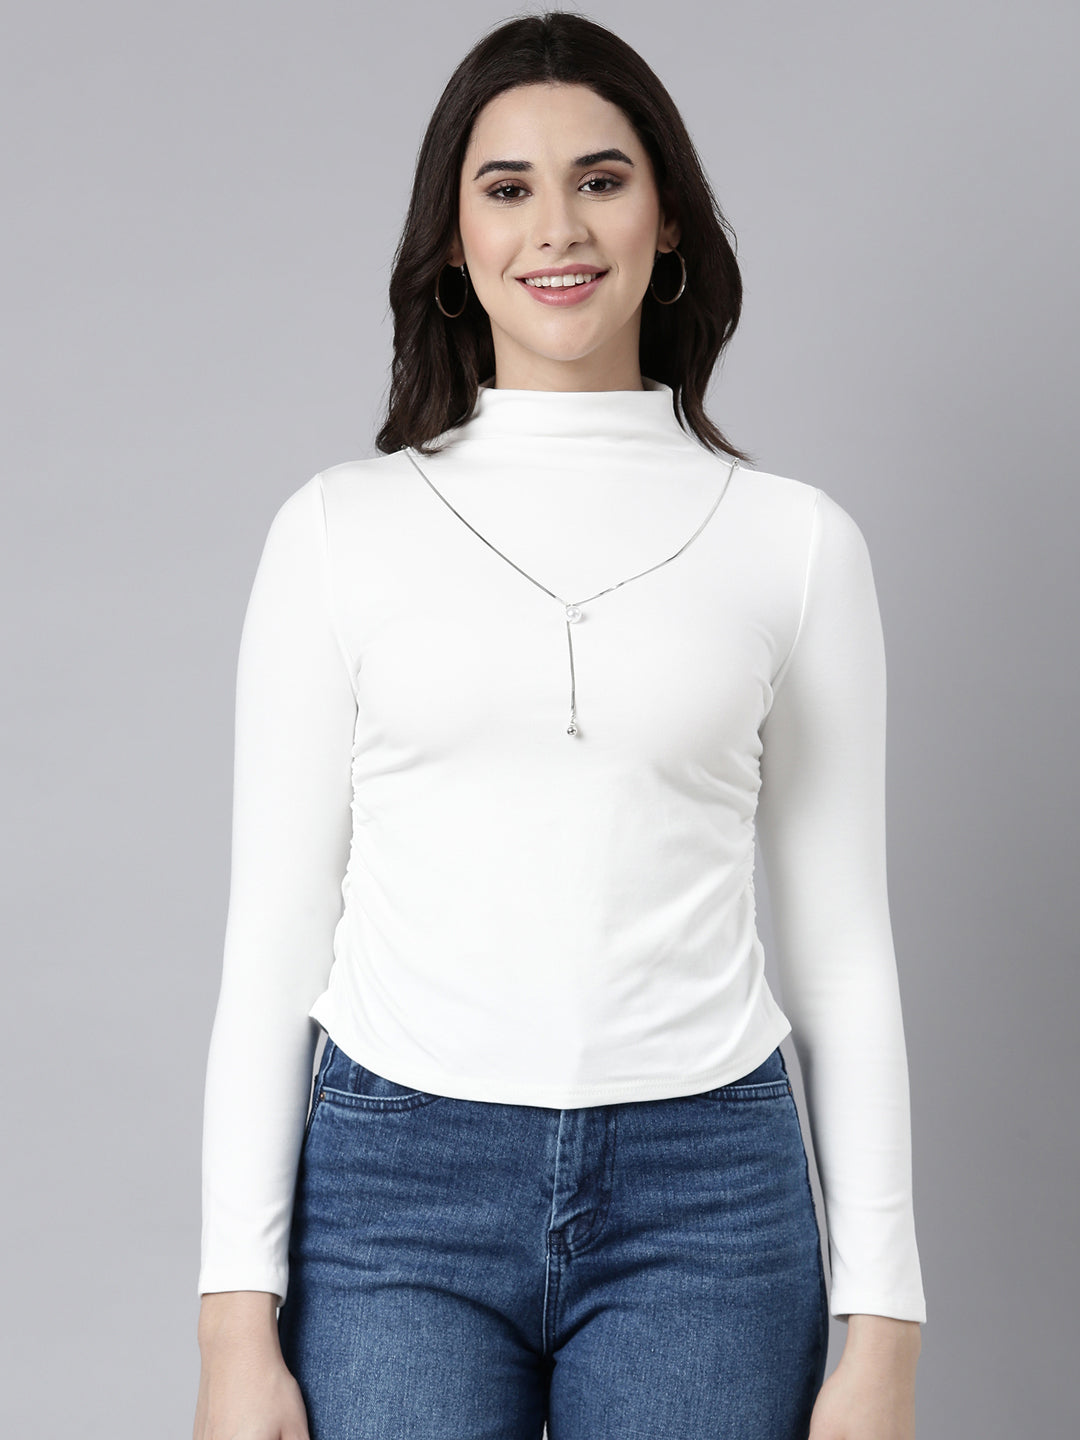 Women Solid Off White Fitted Top Comes with Neck Chain